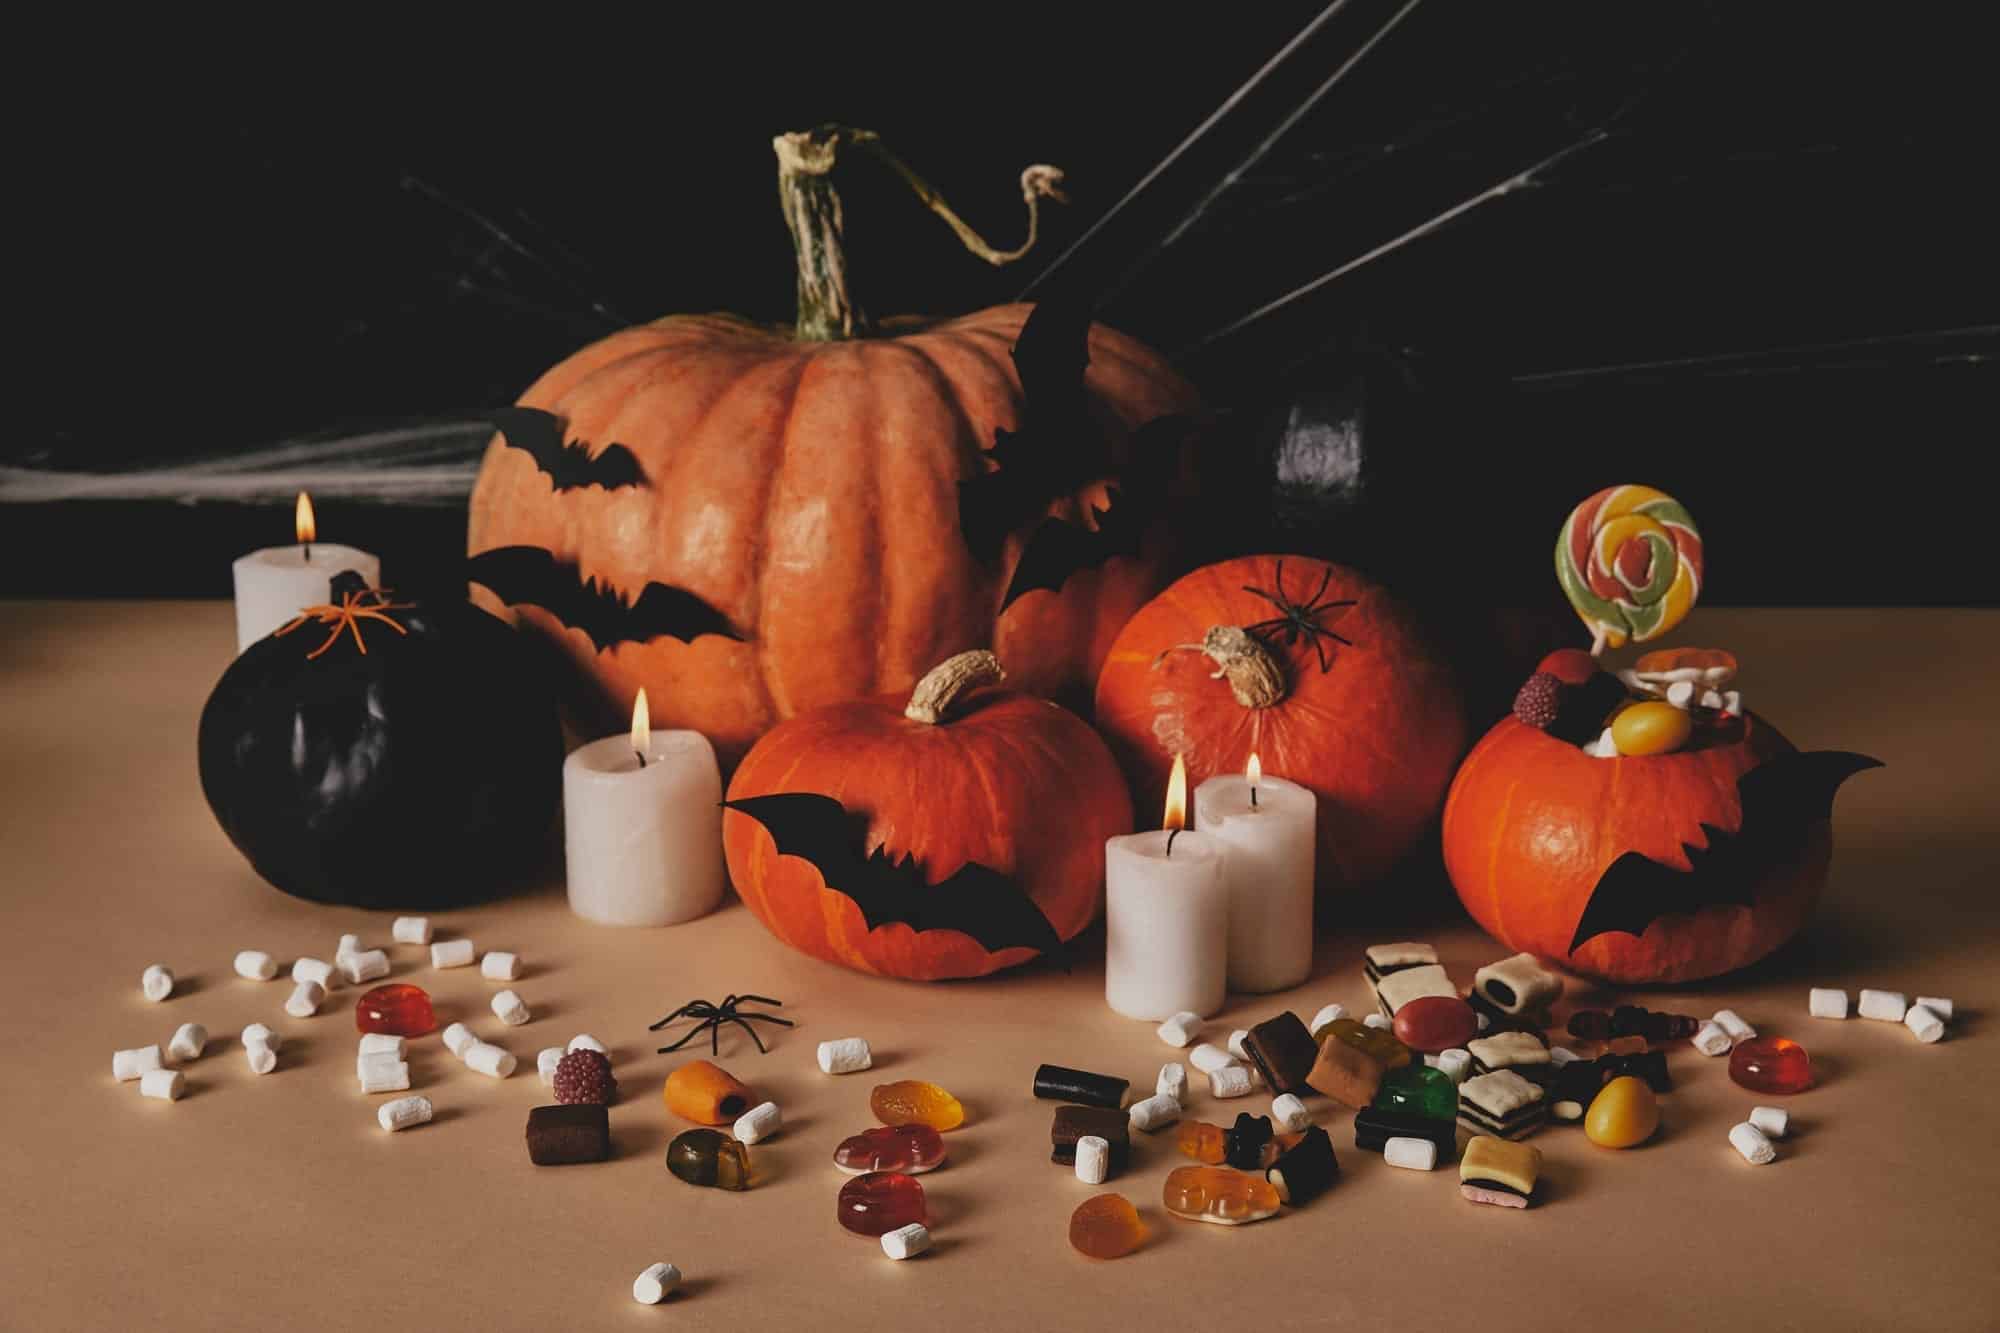 Pumpkins with candles, bats and candy